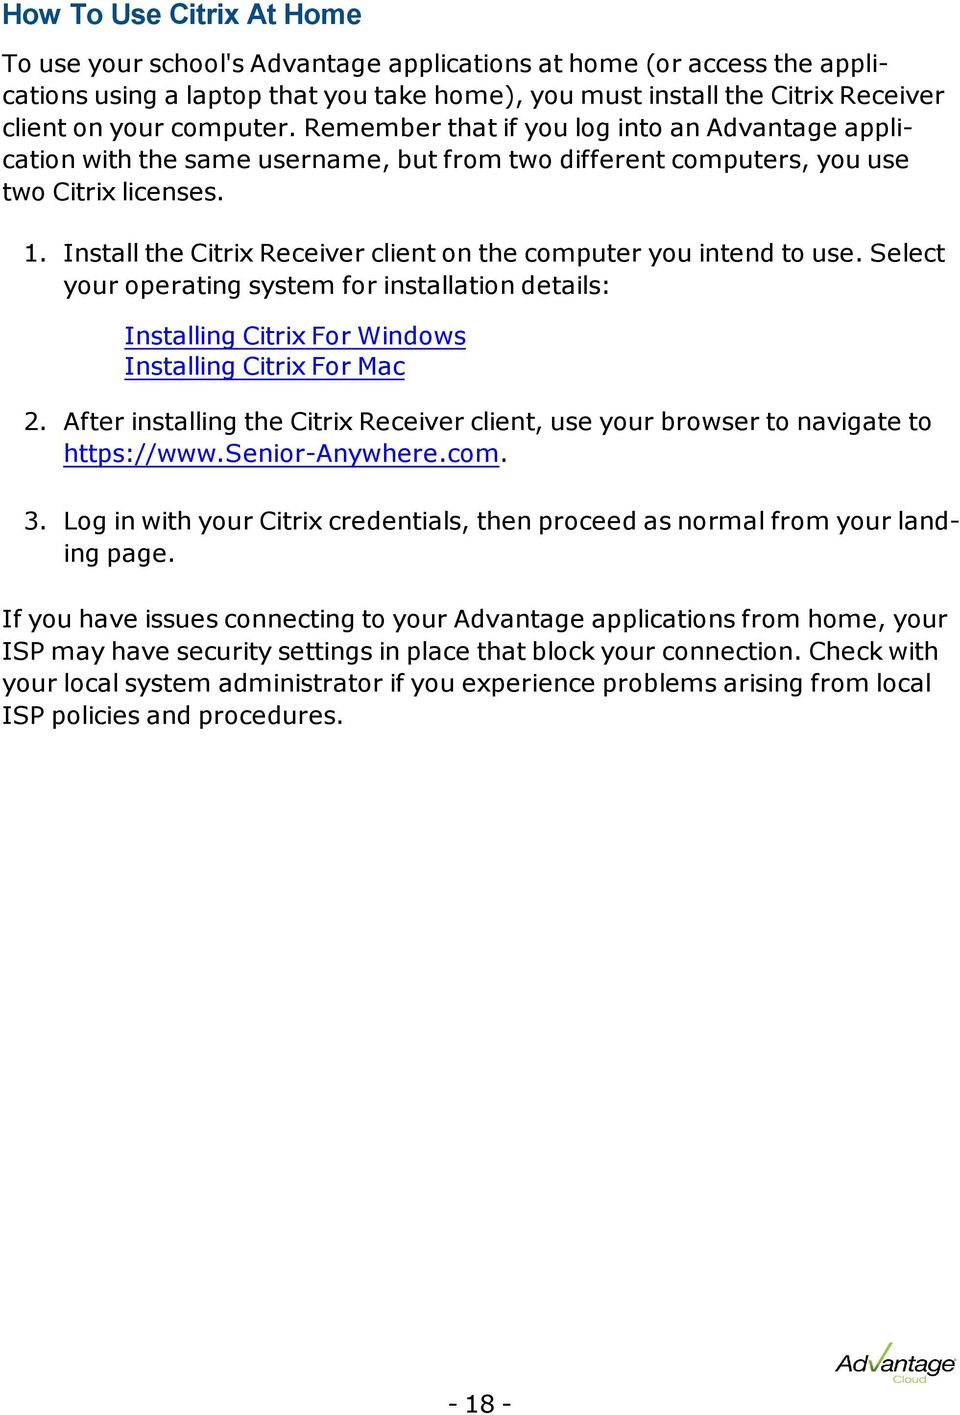 Install the Citrix Receiver client on the computer you intend to use. Select your operating system for installation details: Installing Citrix For Windows Installing Citrix For Mac 2.